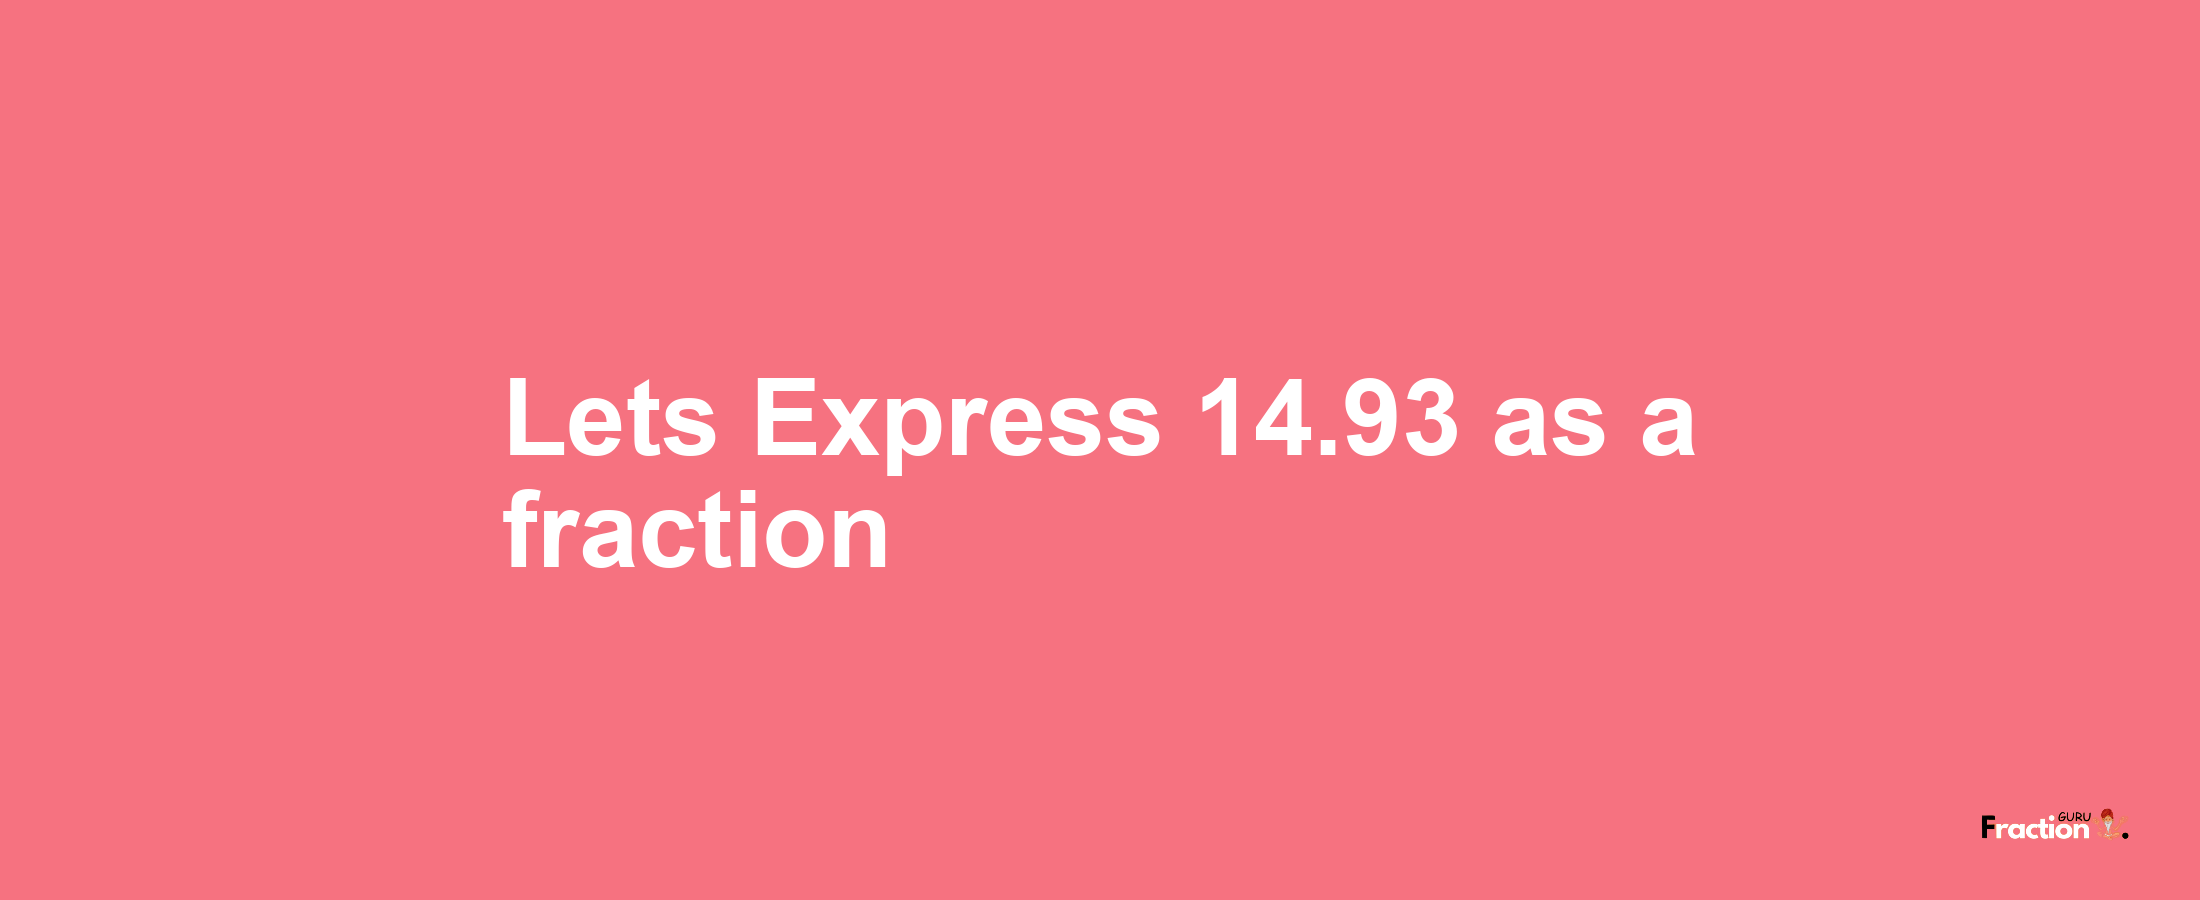 Lets Express 14.93 as afraction